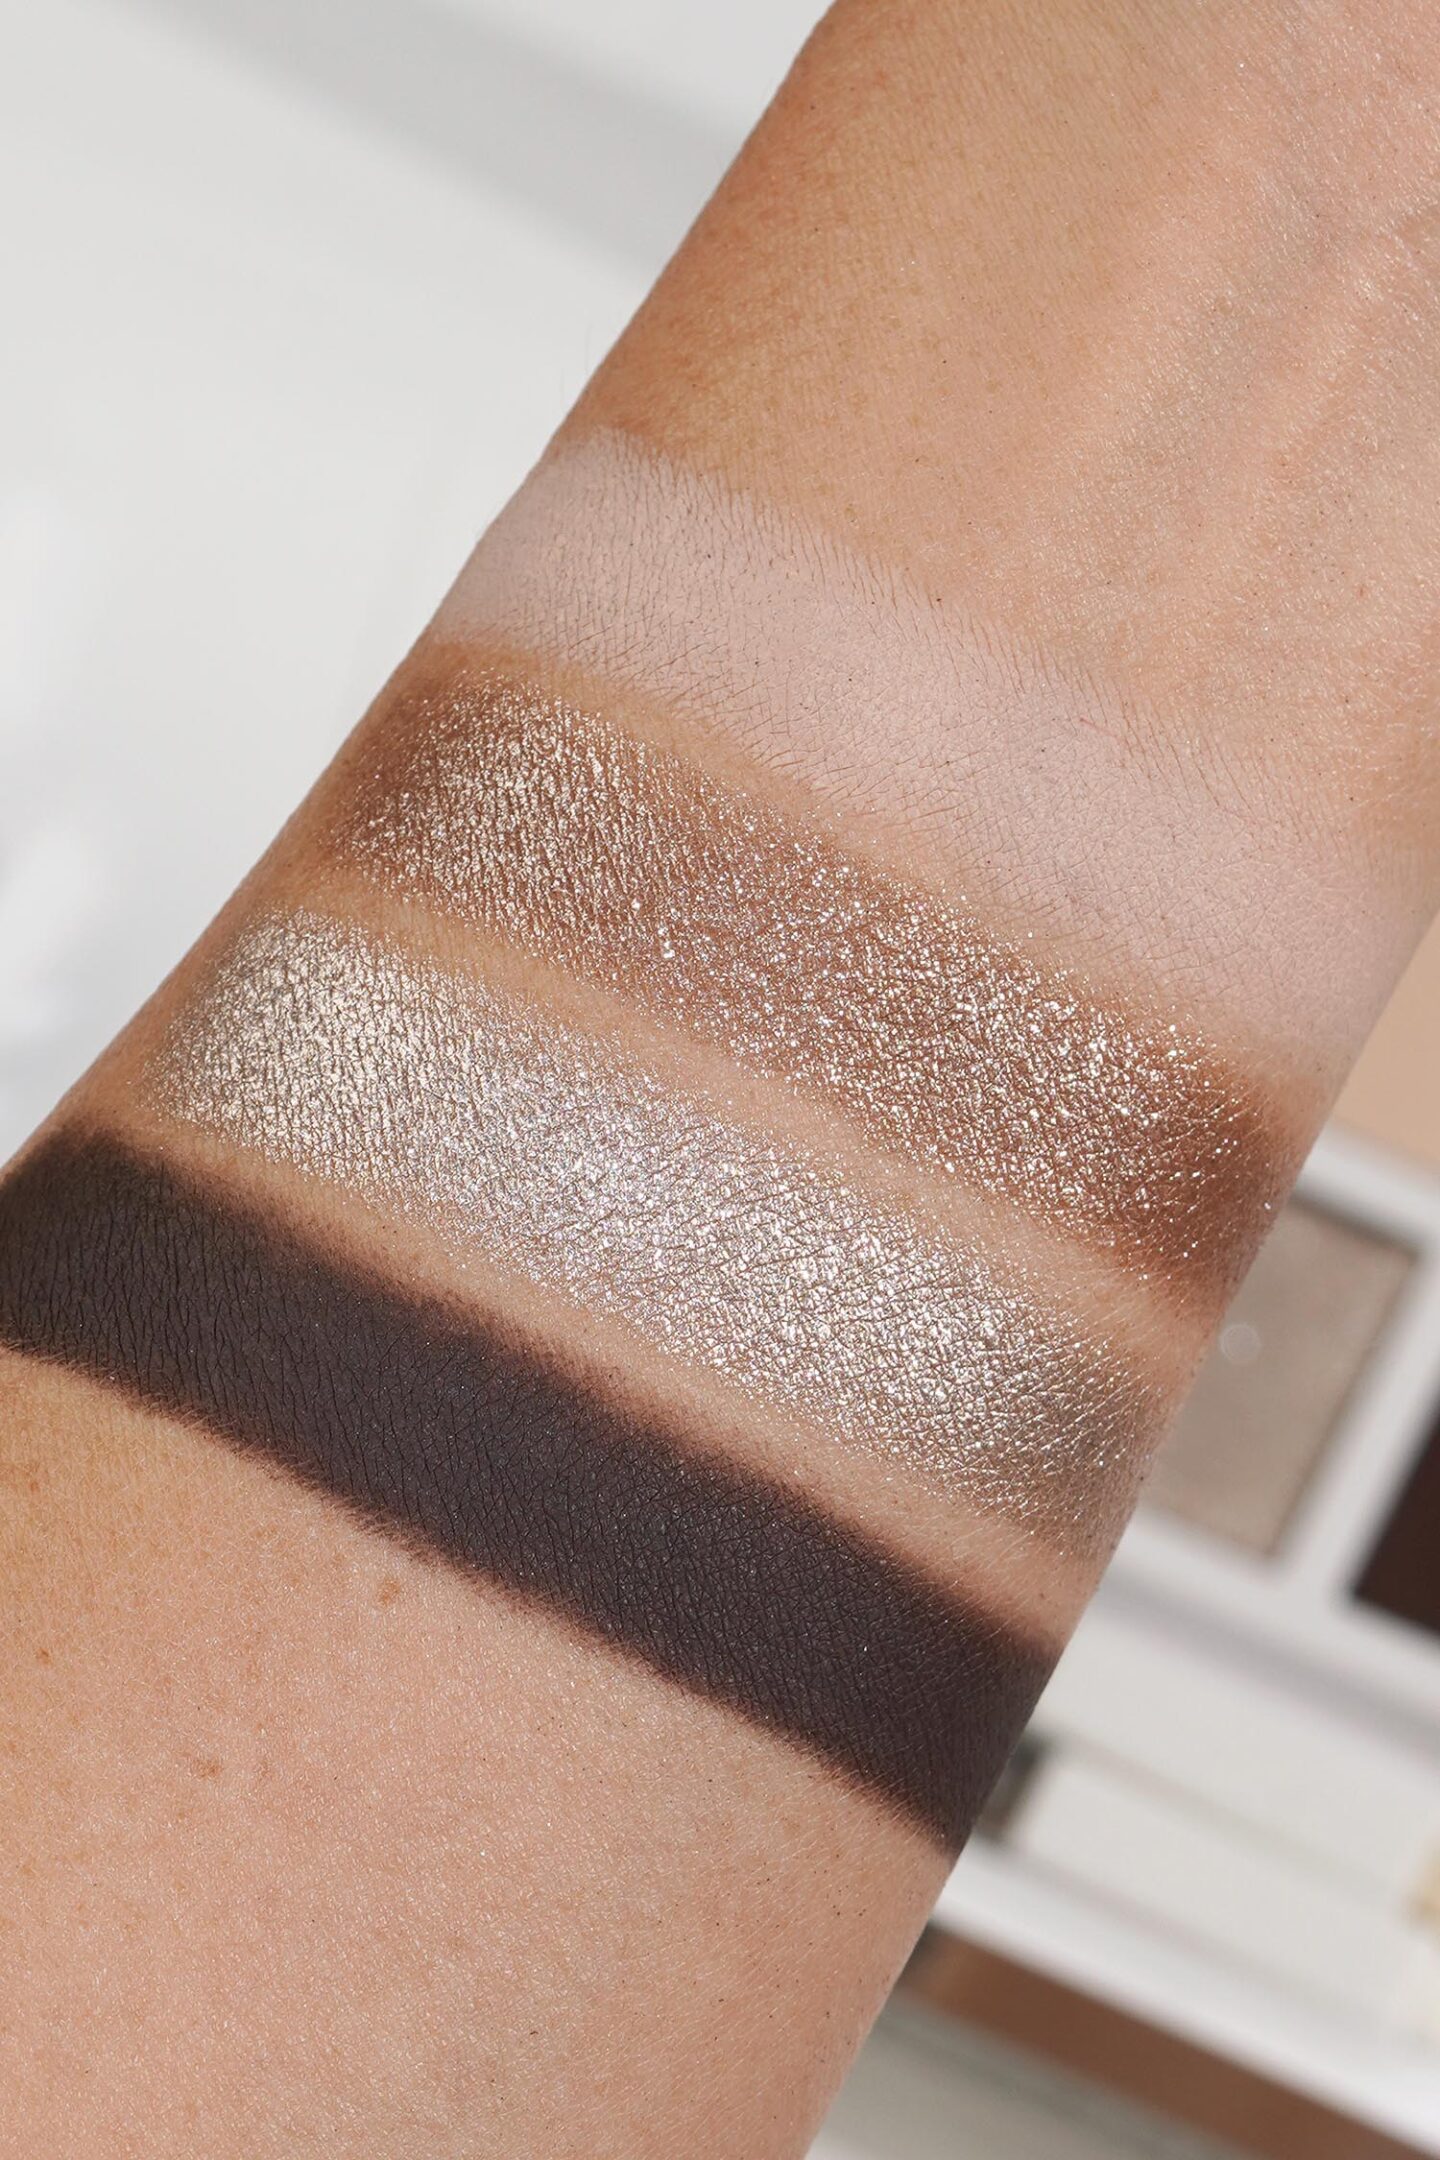 Tom Ford Soleil Neige Eye Color Quad in Lumiere D’Hiver swatches